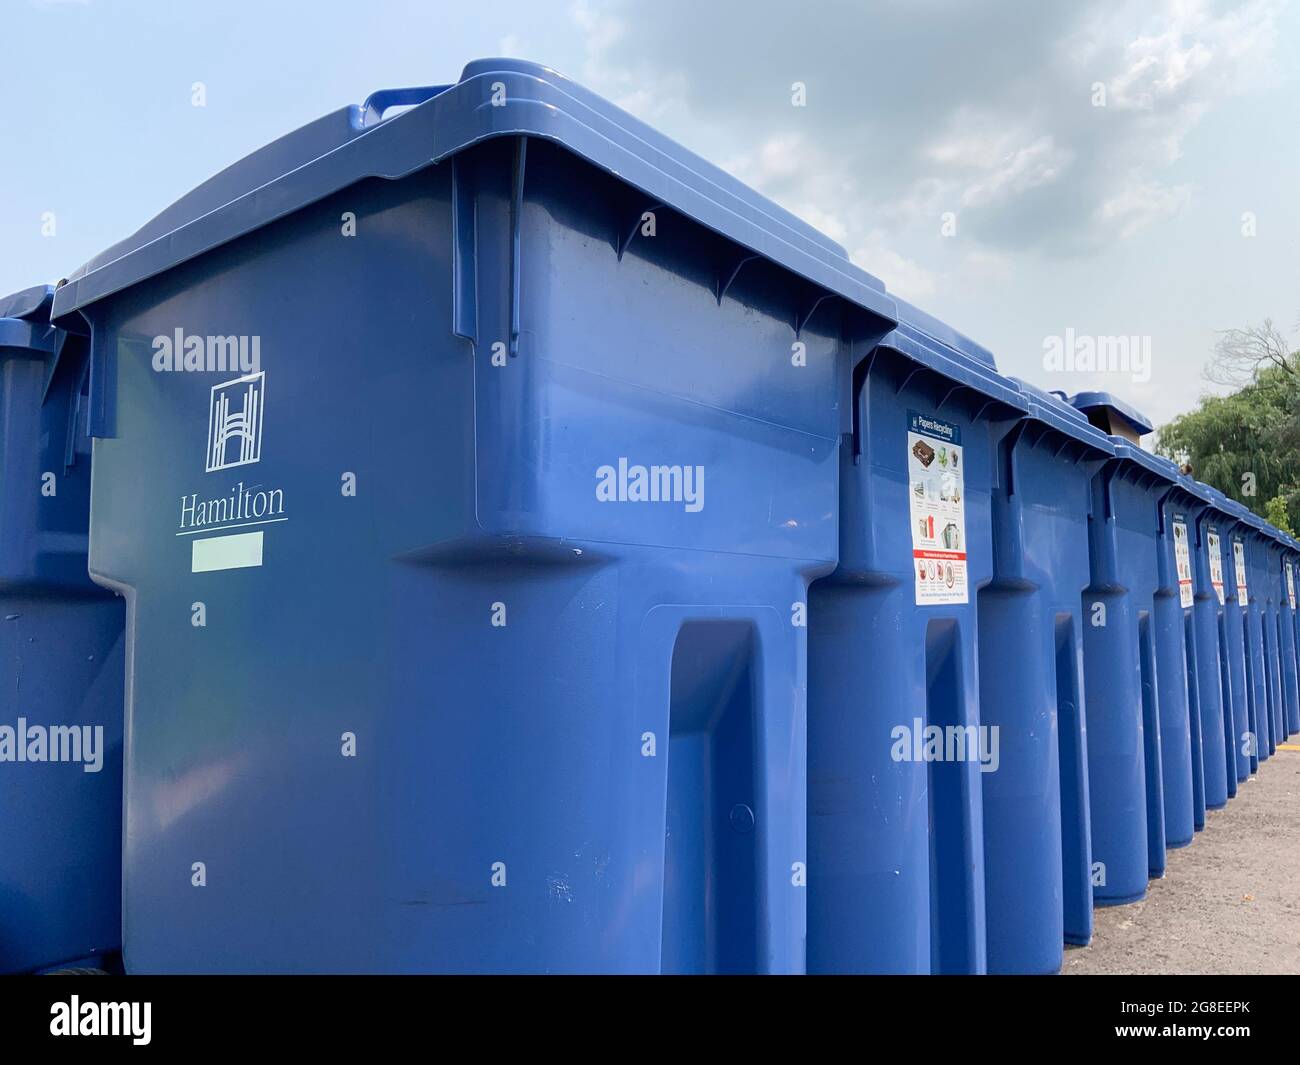 A group of city garbage bins are organized closely together for waste collection at an apartment complex. Stock Photo